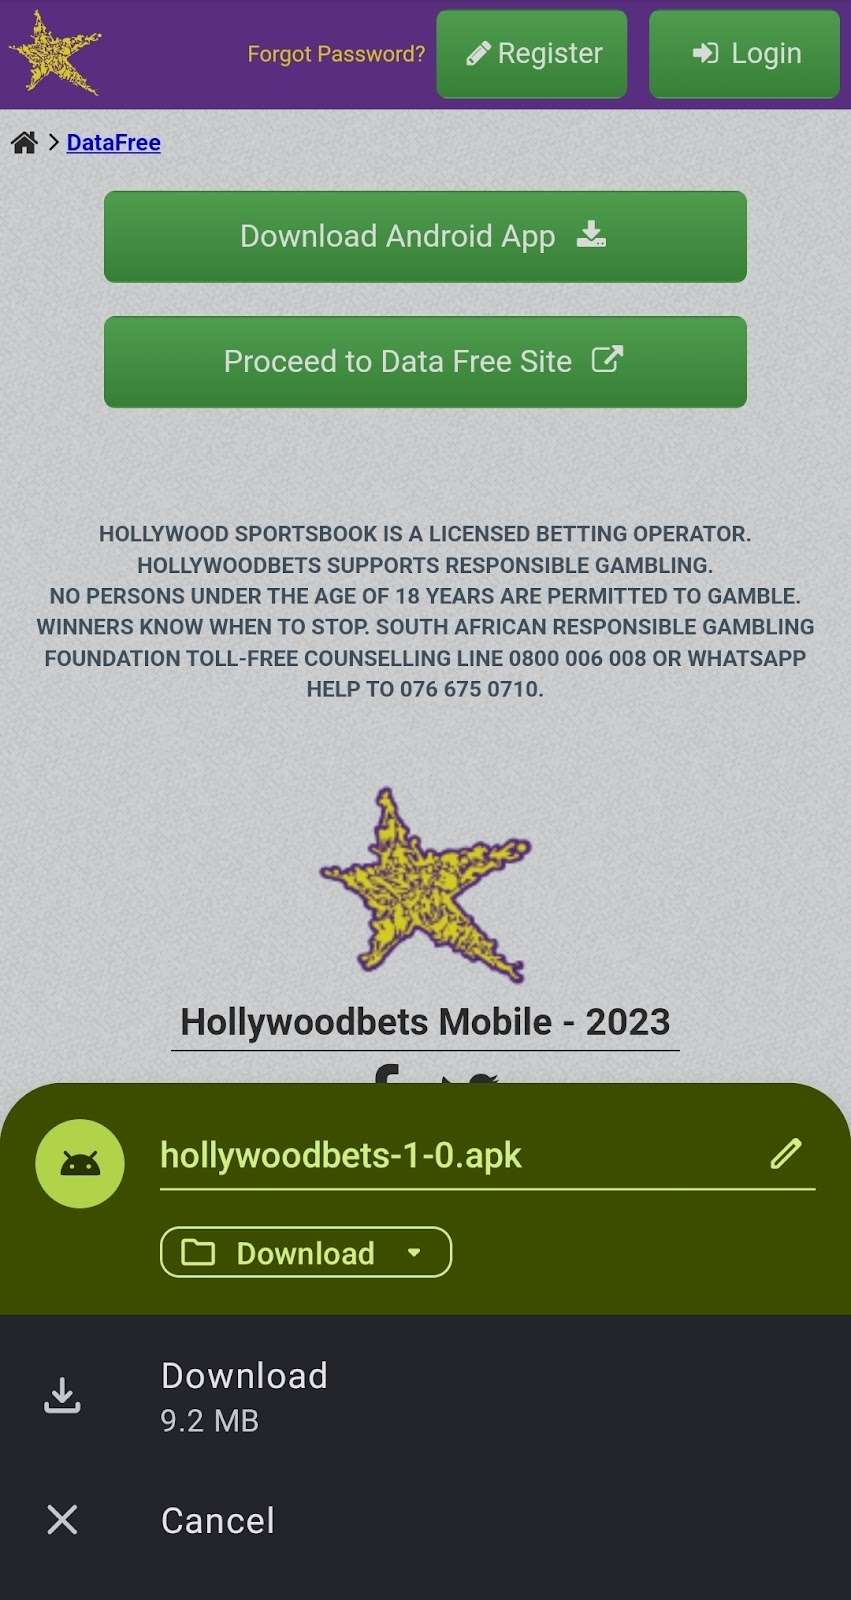 hollywoodbets app download process 2